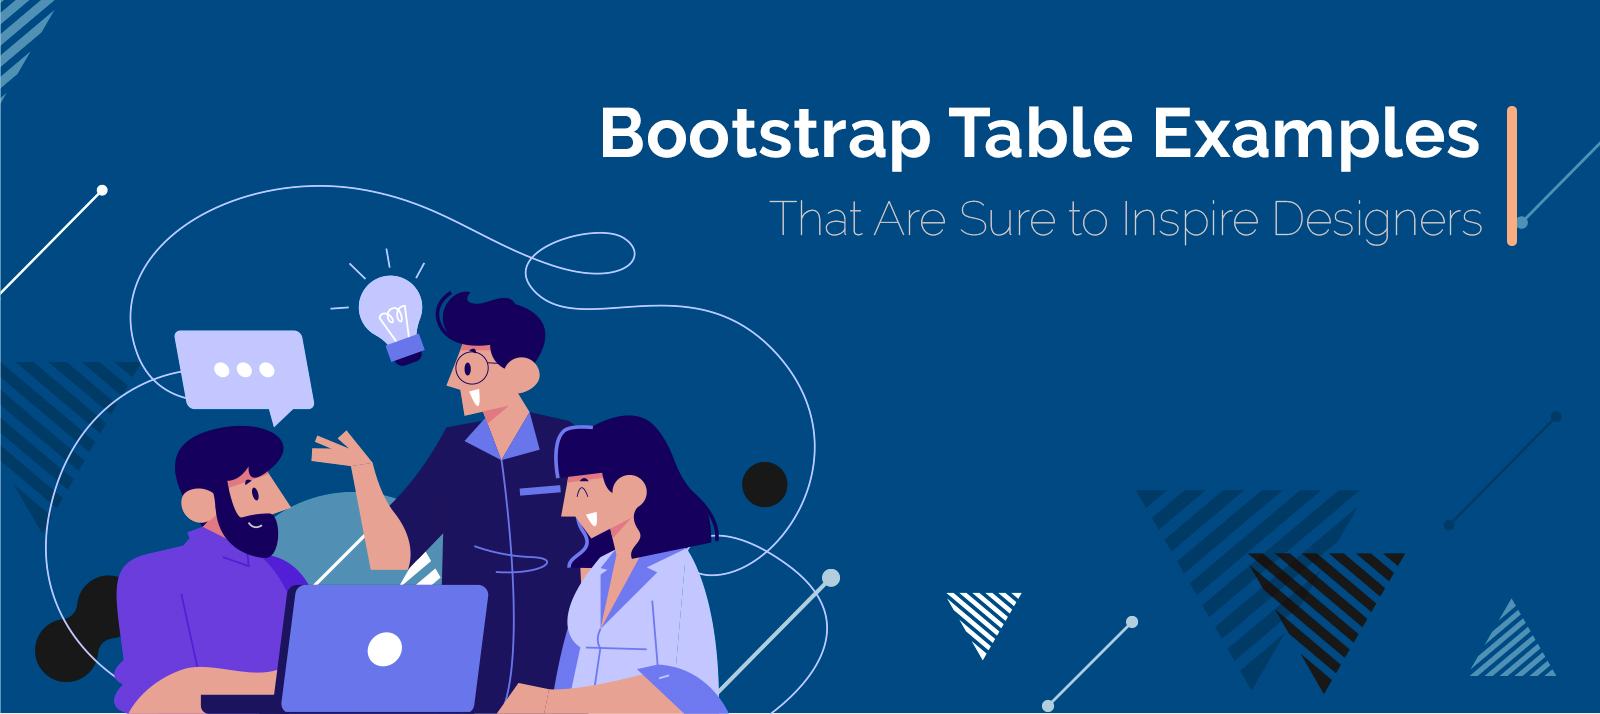  Impressive Bootstrap Table Examples That Are Sure to Inspire Designers 